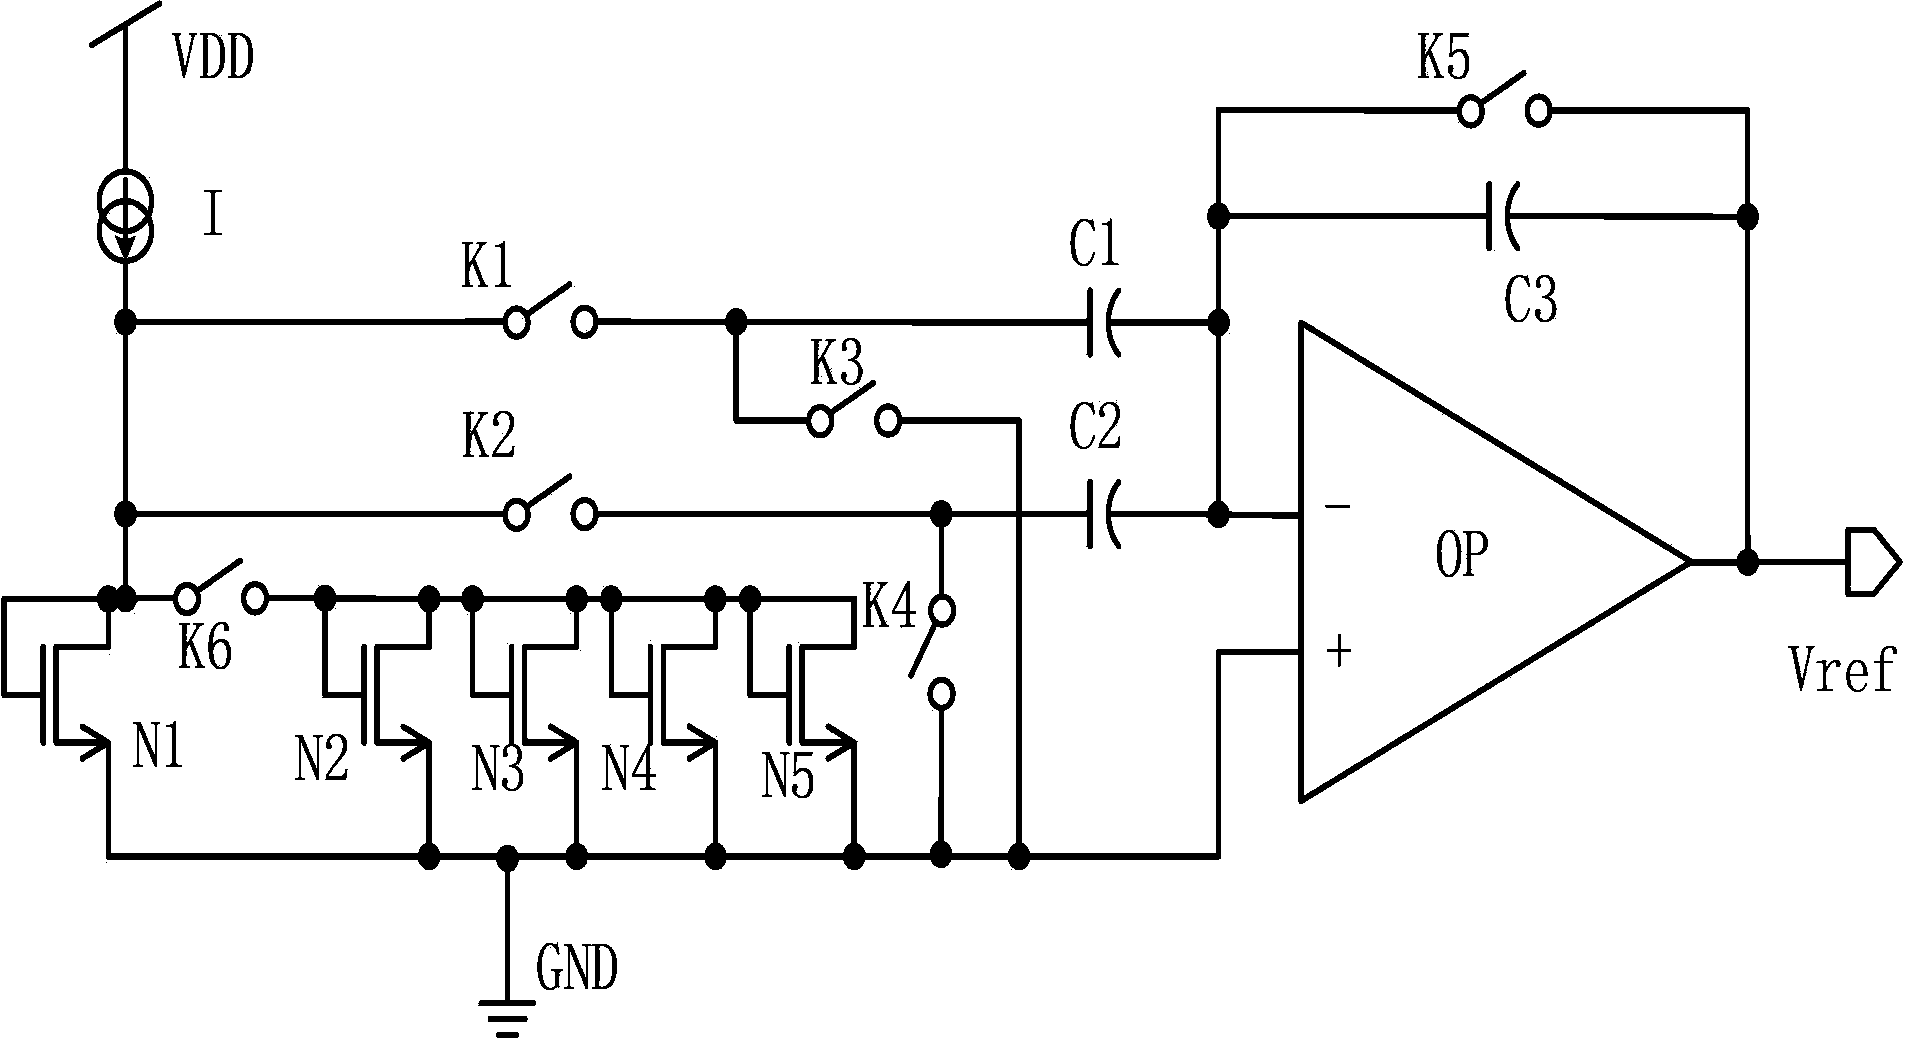 Reference voltage source